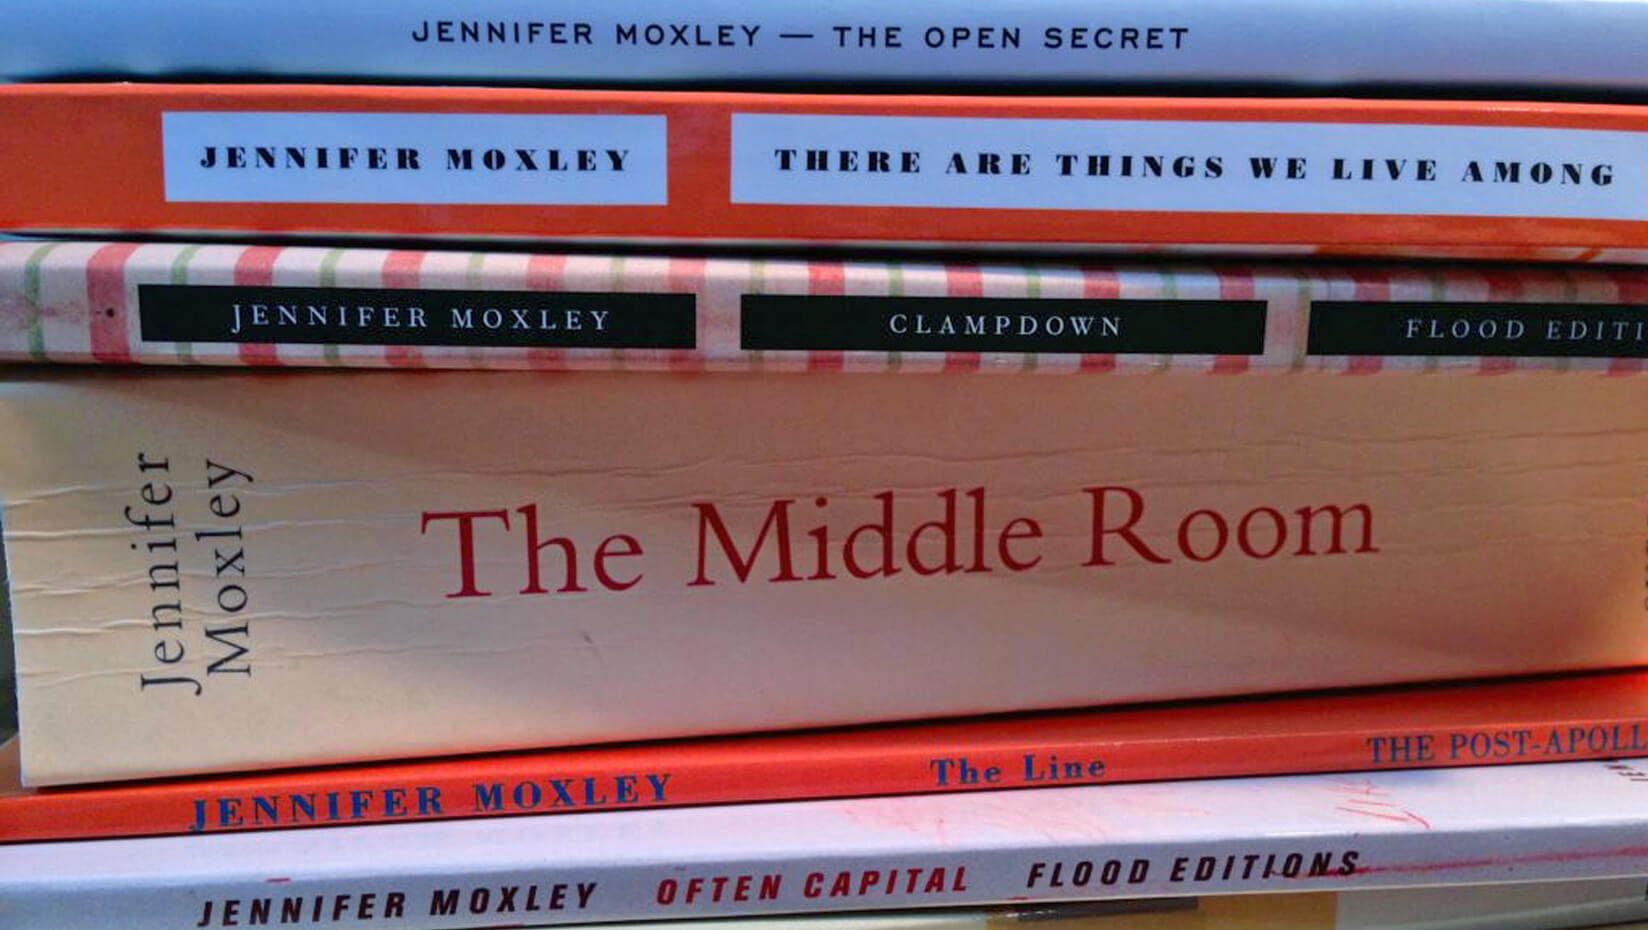 A stack of books written by Jennifer Moxley